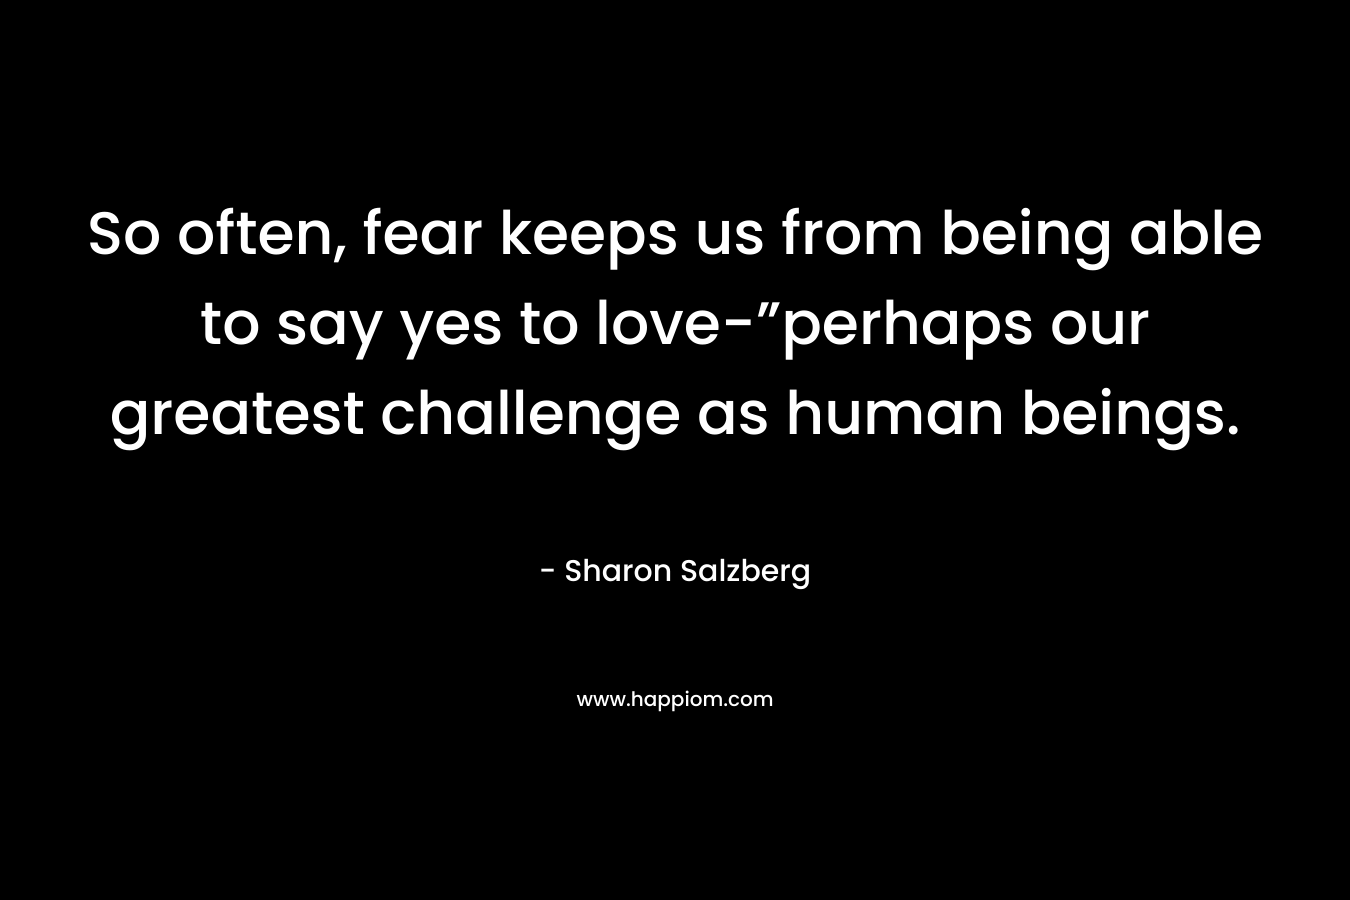 So often, fear keeps us from being able to say yes to love-”perhaps our greatest challenge as human beings. – Sharon Salzberg